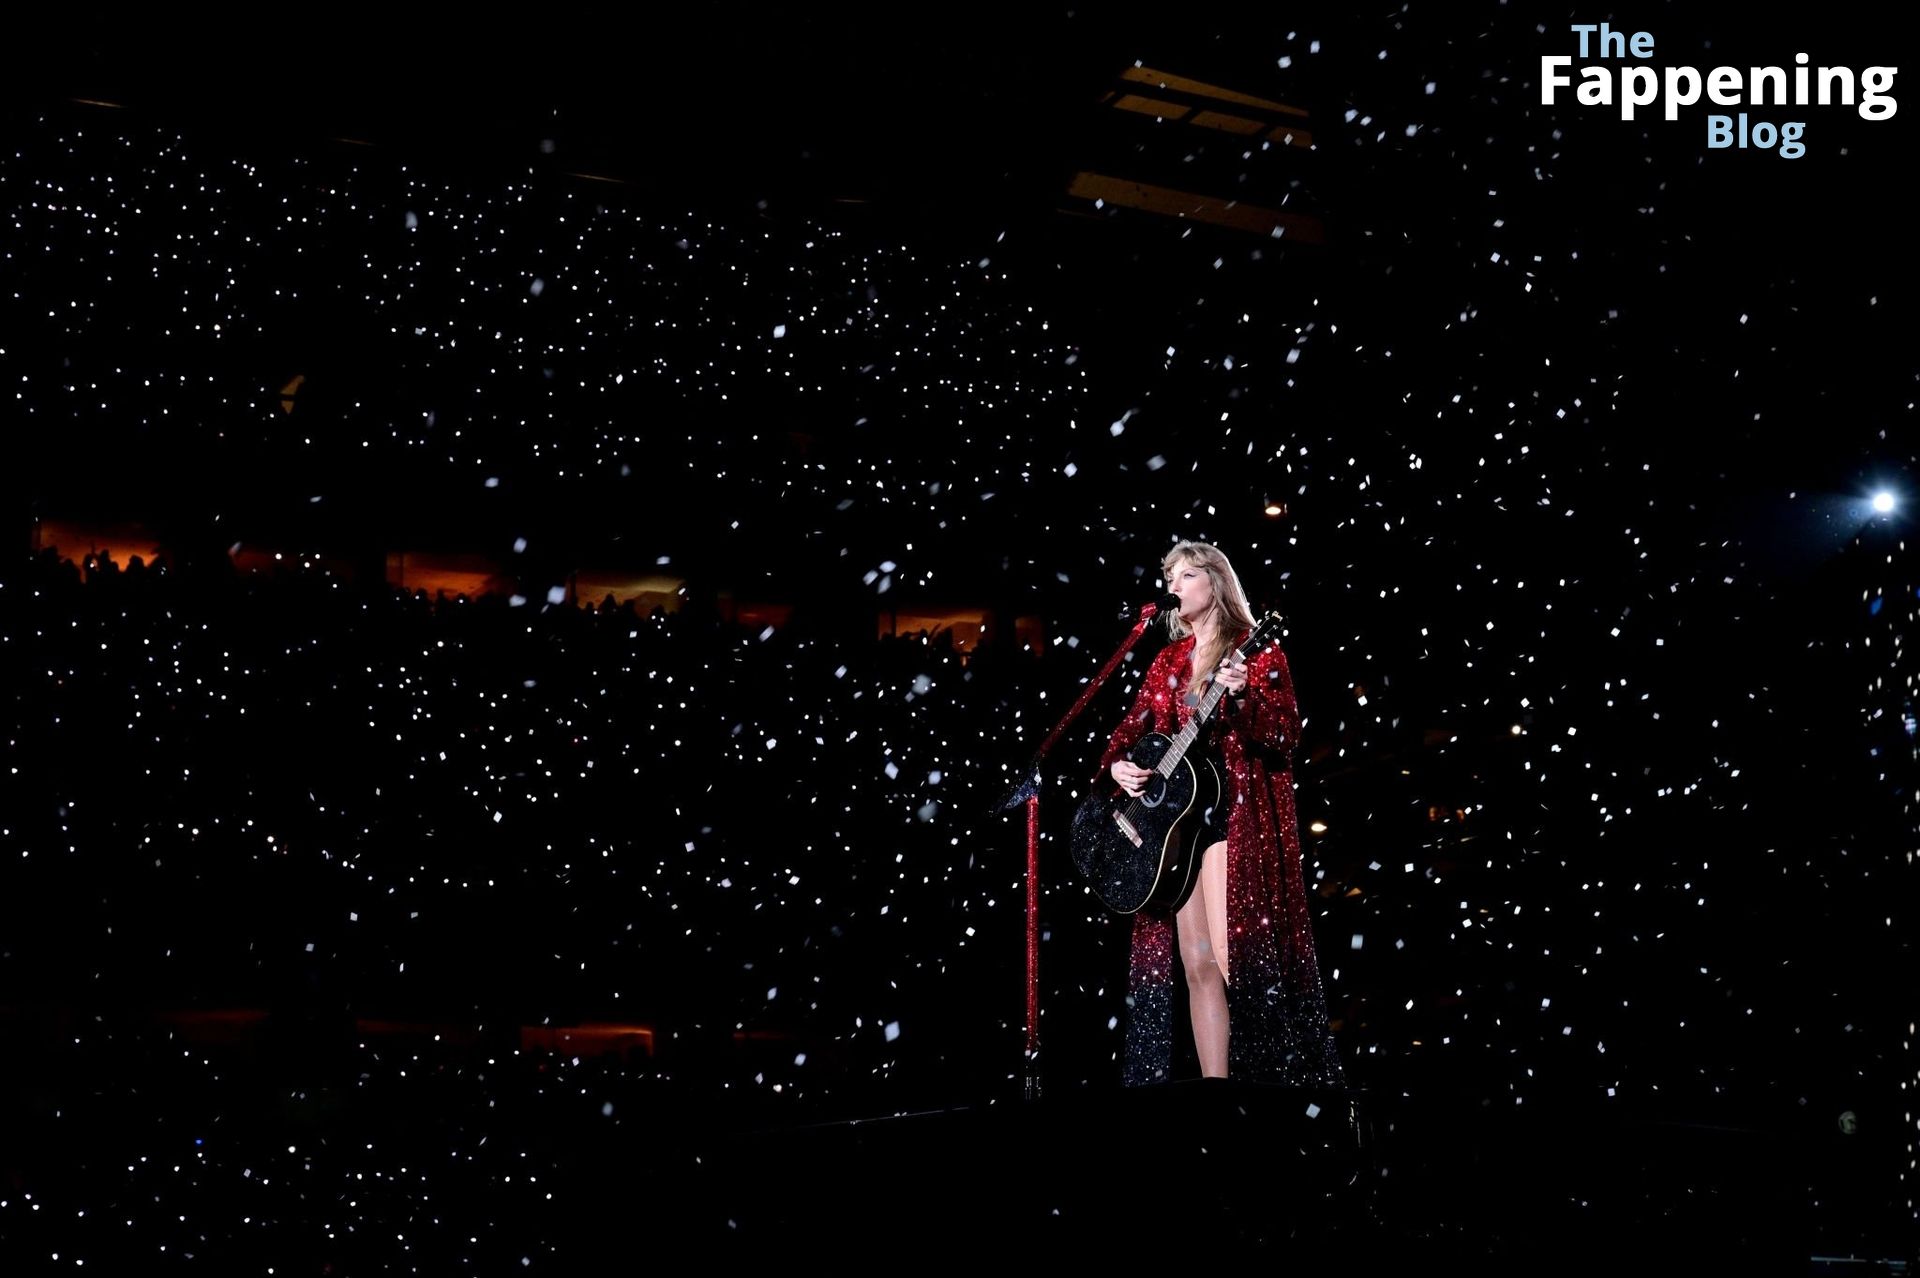 Taylor Swift Looks Stunning on Stage at The Eras Tour in Philadelphia (17 Photos)